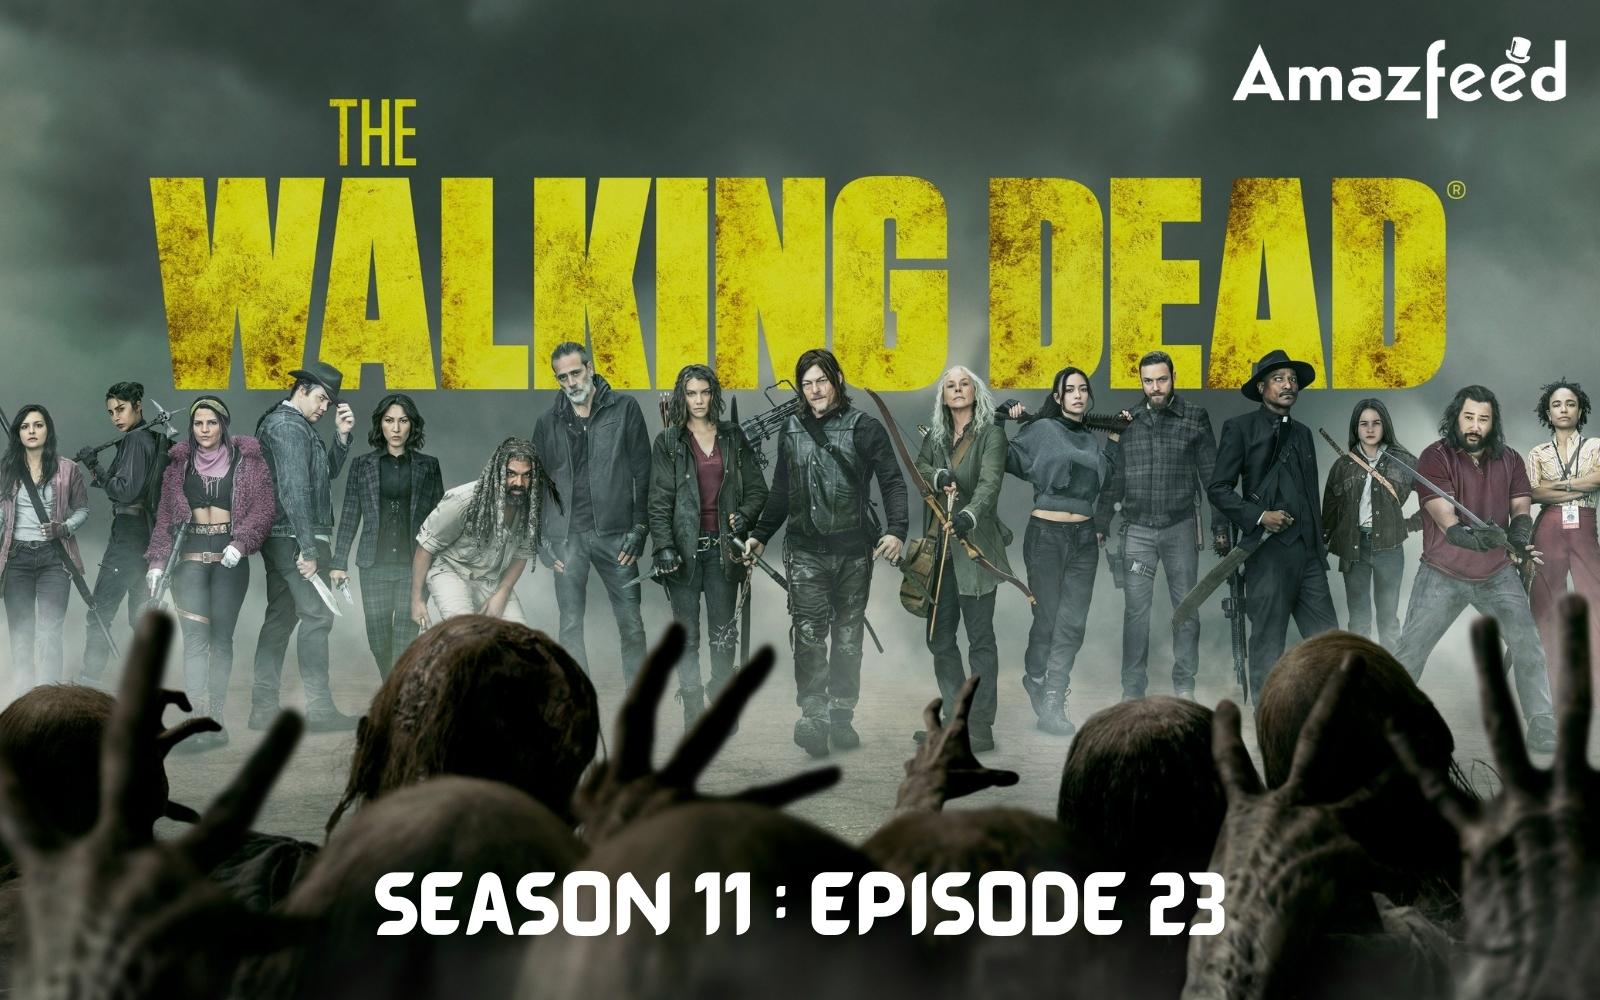 The Walking Dead Season 11 Episode 23 : Preview, Where to Watch, Speculation, Countdown & Trailer